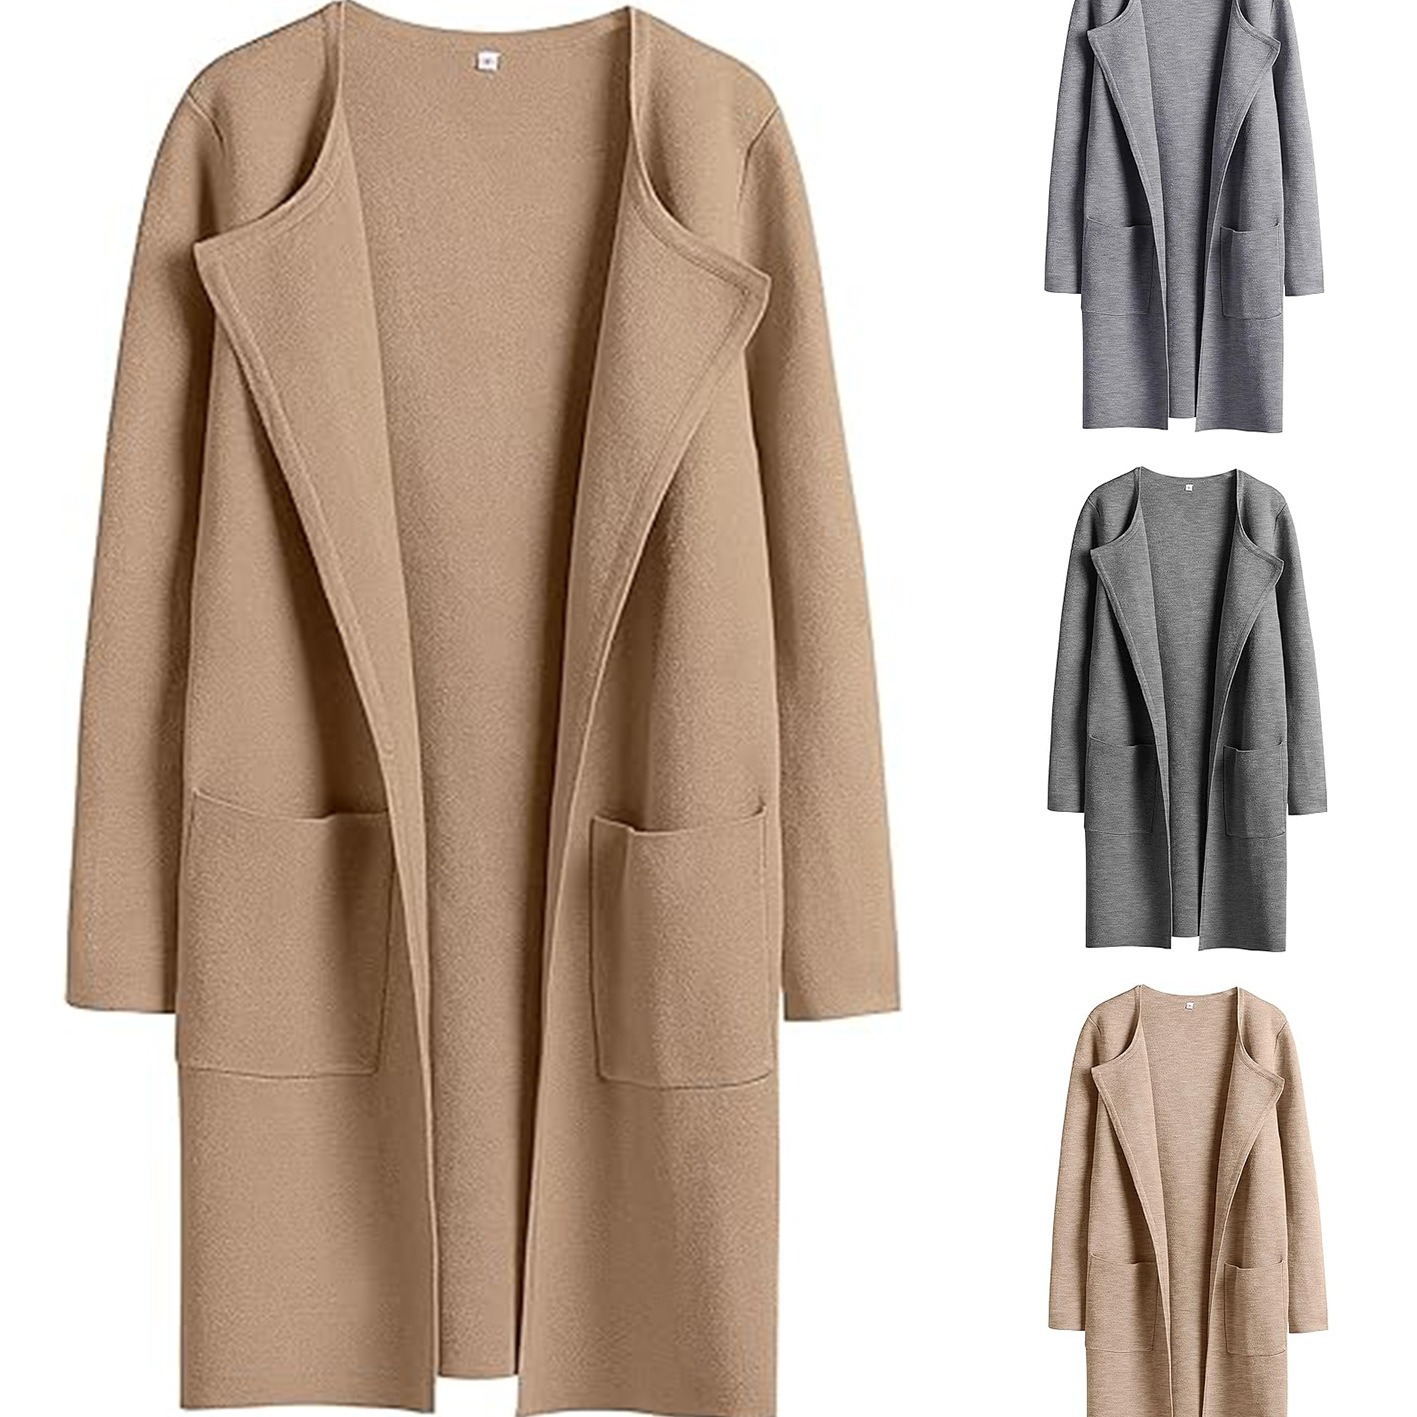 winter women's woolen coat   slim fit mid length casual jacket with pockets 5105